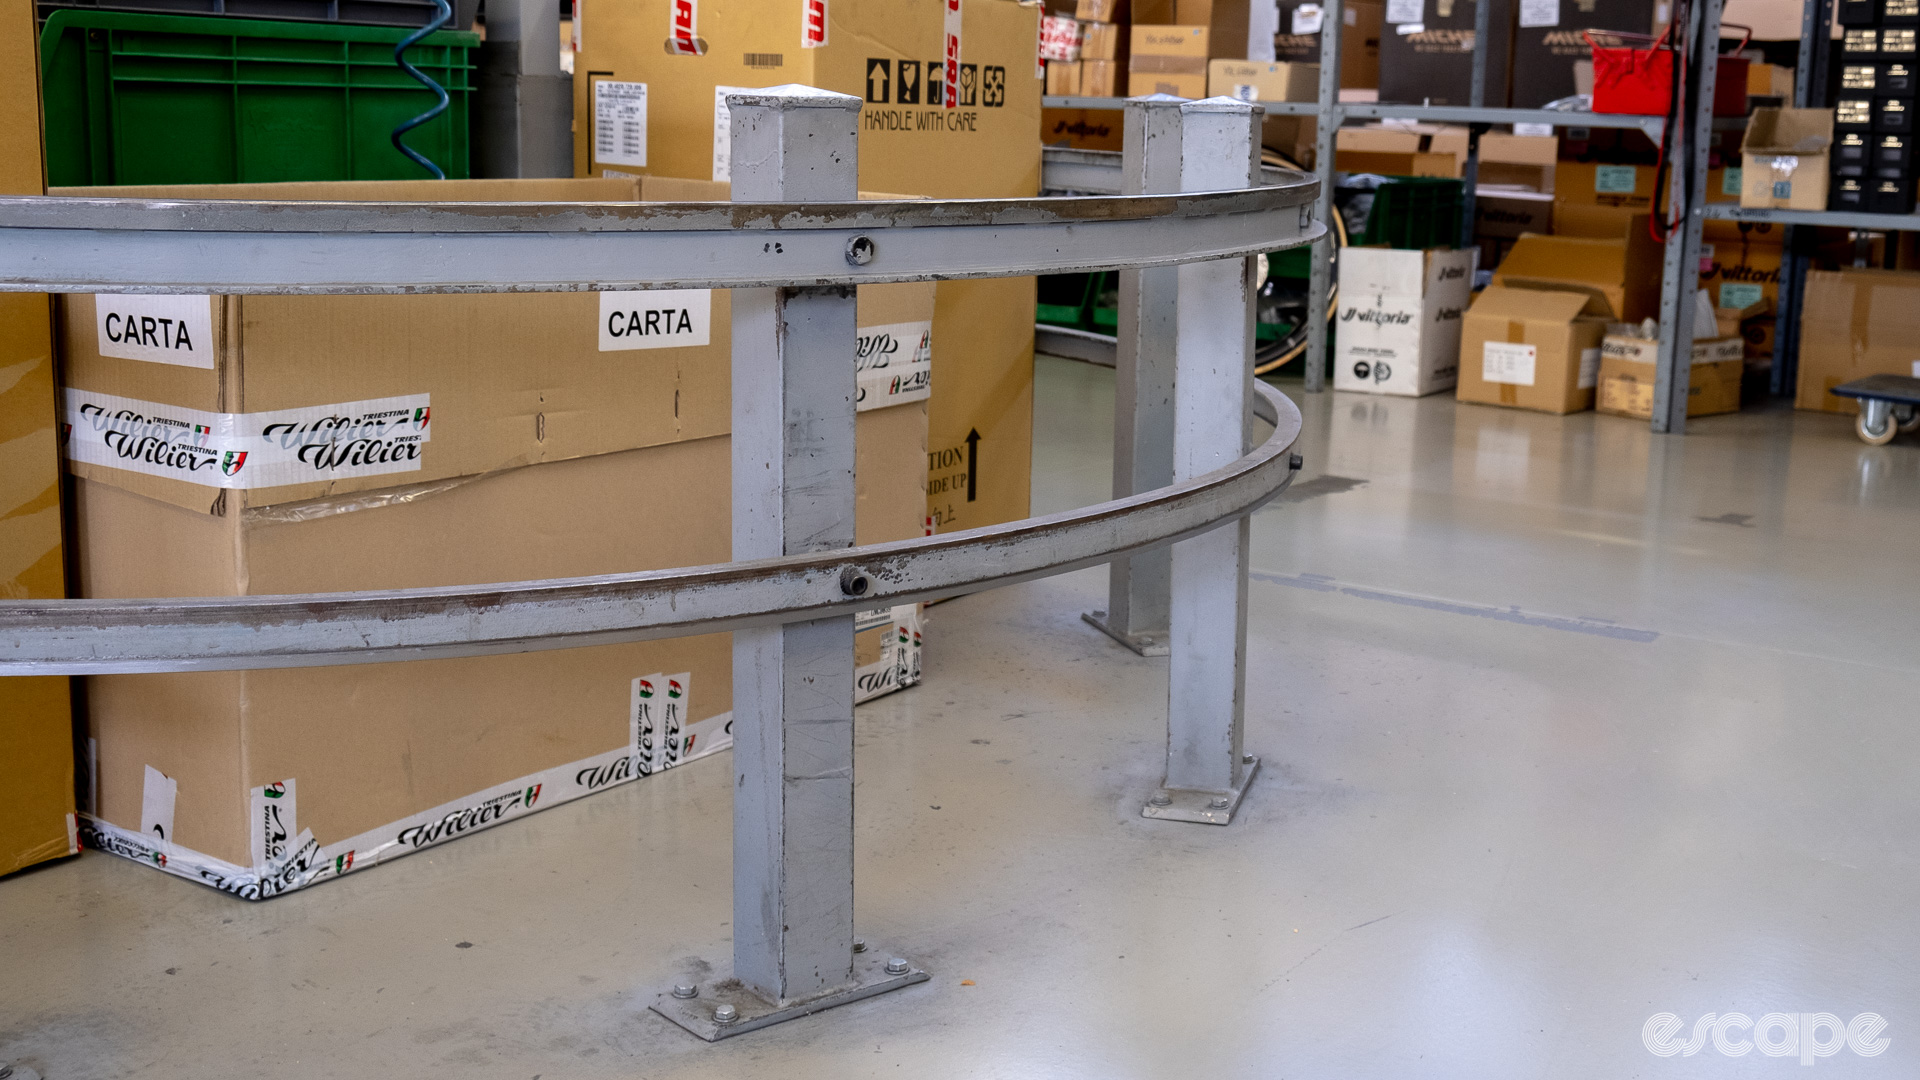 The photos show the rails the bike stands roll on cornering around the end of the assembly line to take the bikes up the opposite side. 